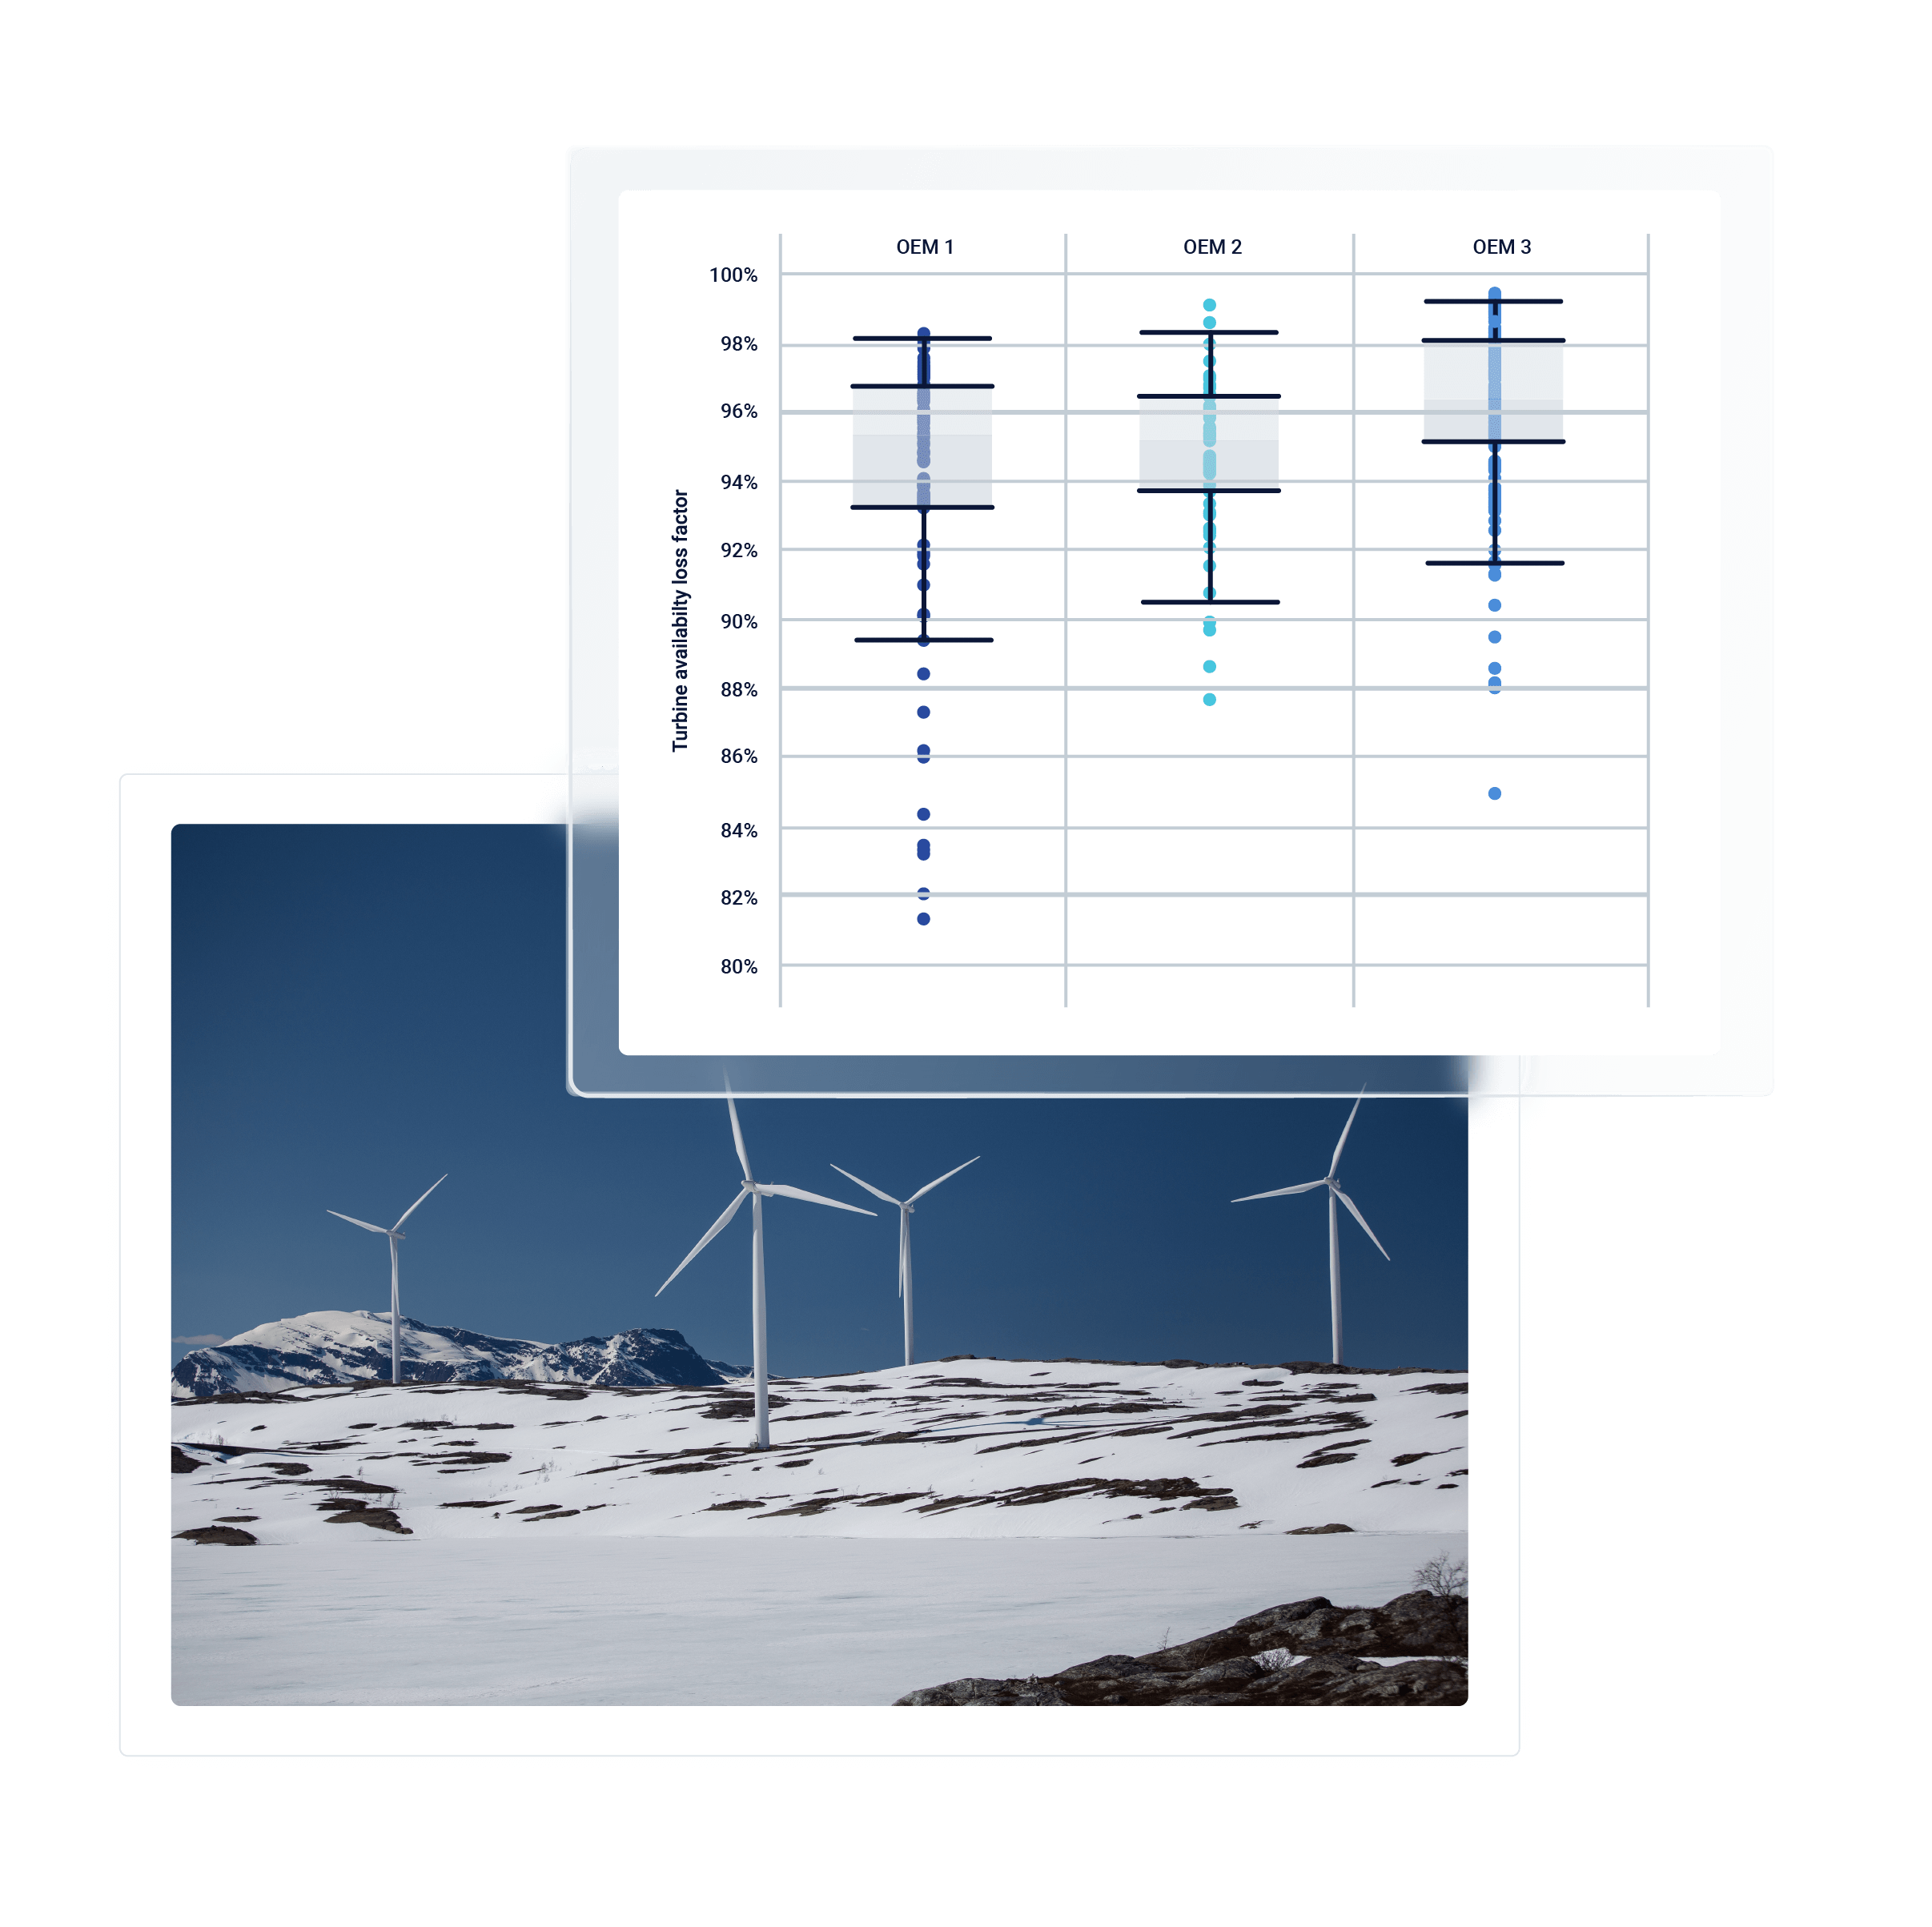 An image of a turbine farm on a snowy mountain with a graph comparing OEMs 